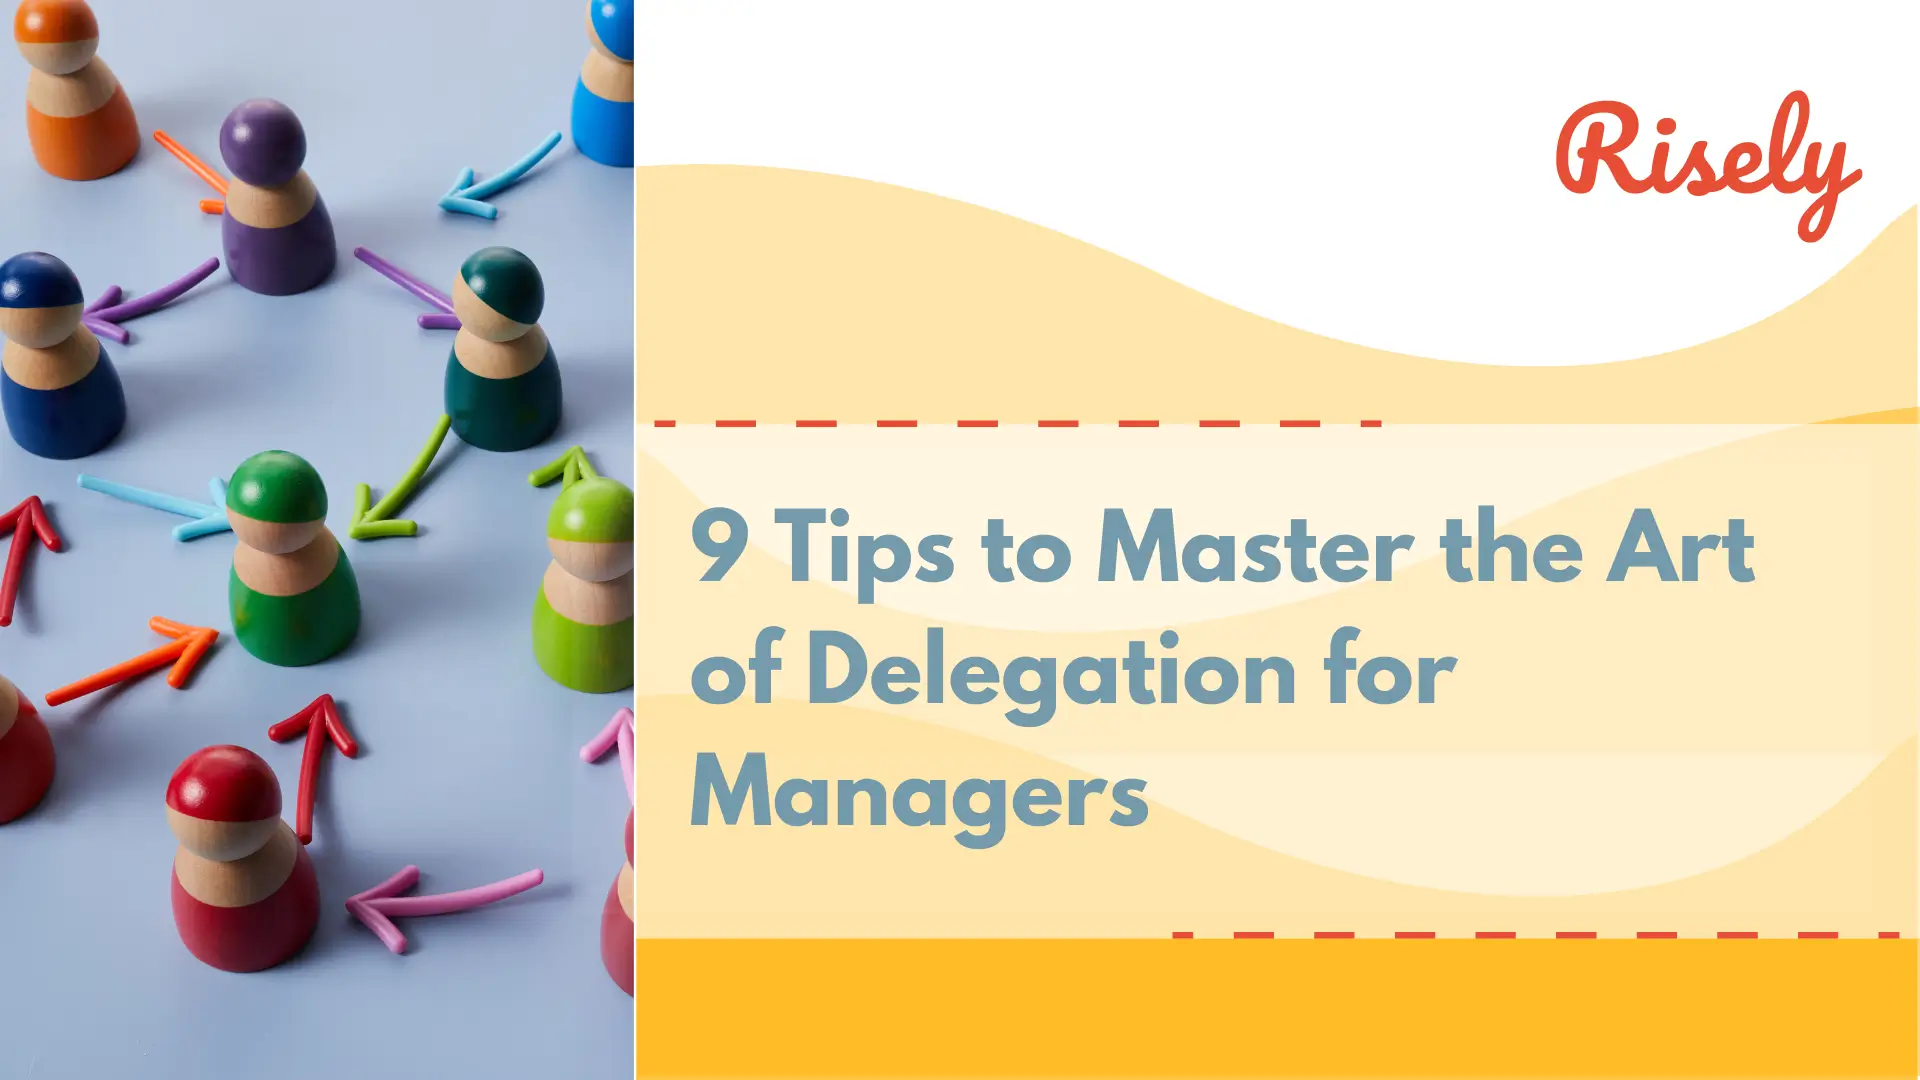 9 Tips to Master the Art of Delegation for Managers